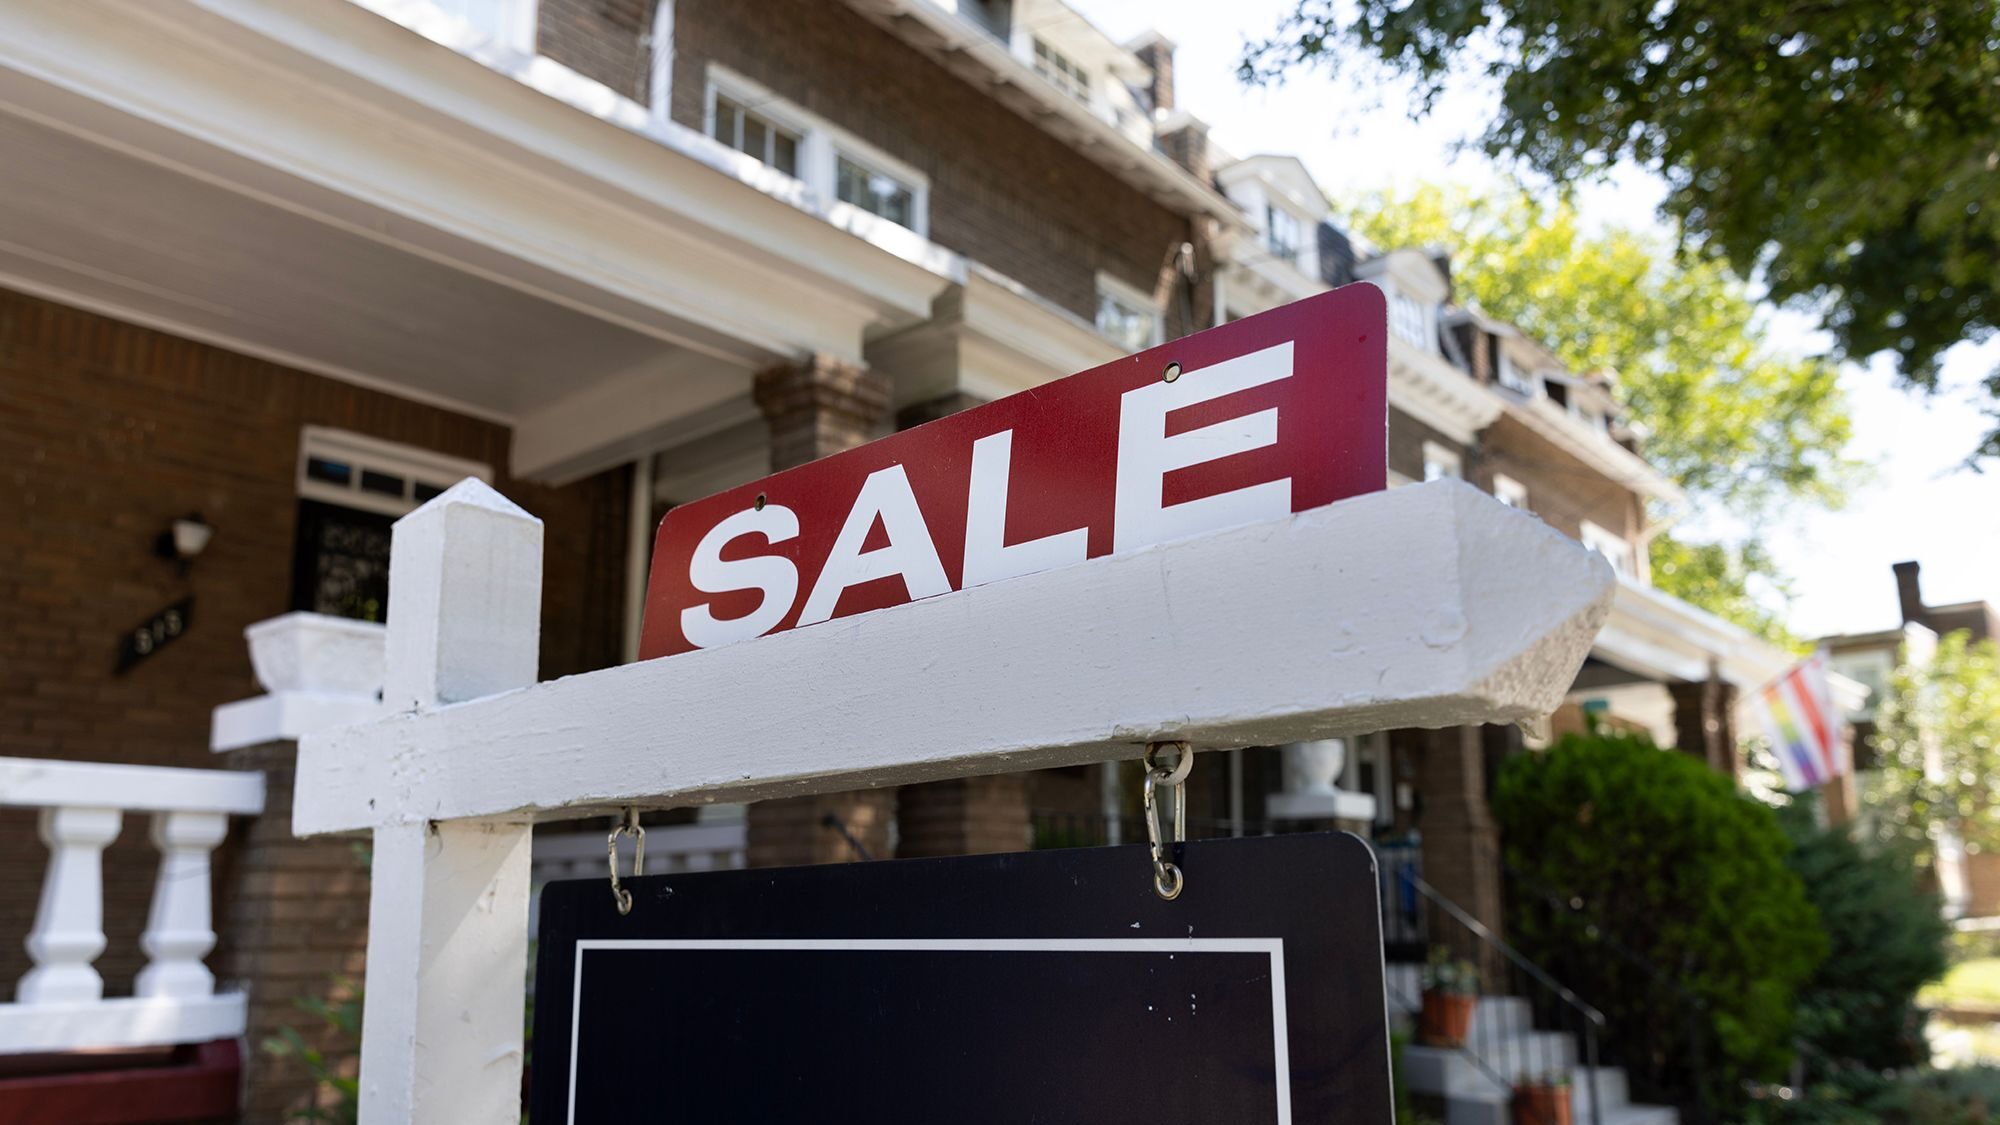 Homebuyers under 30 are receiving help from their family for a down payment, according to a Redfin-...